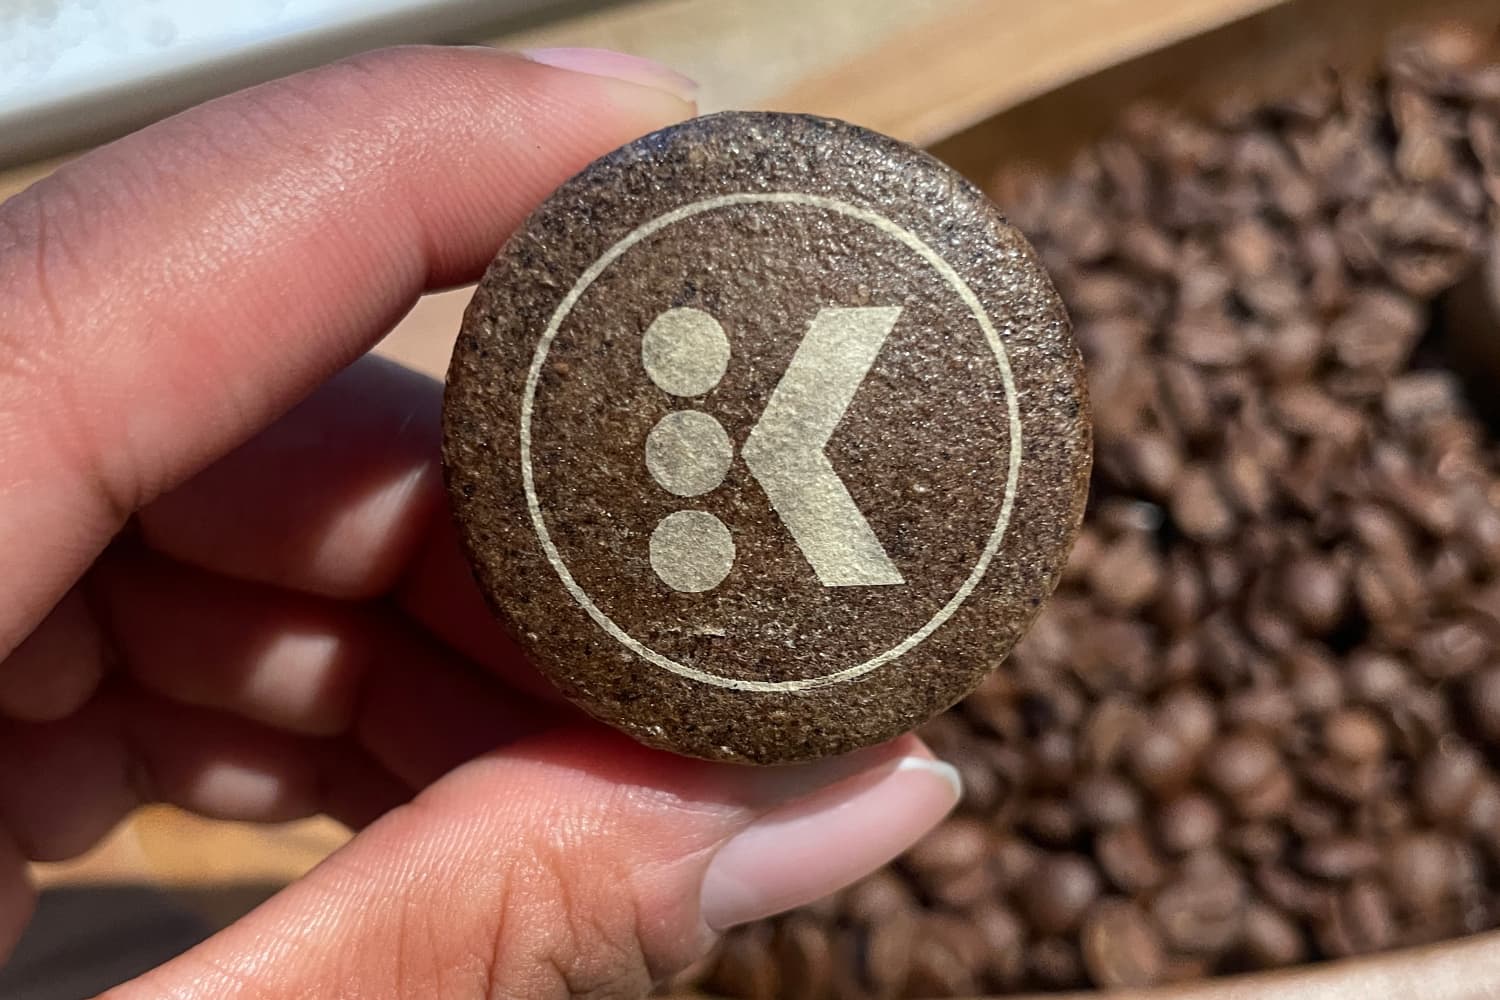 Keurig Addresses Waste Concerns with a New Plant-Based Coffee Pod